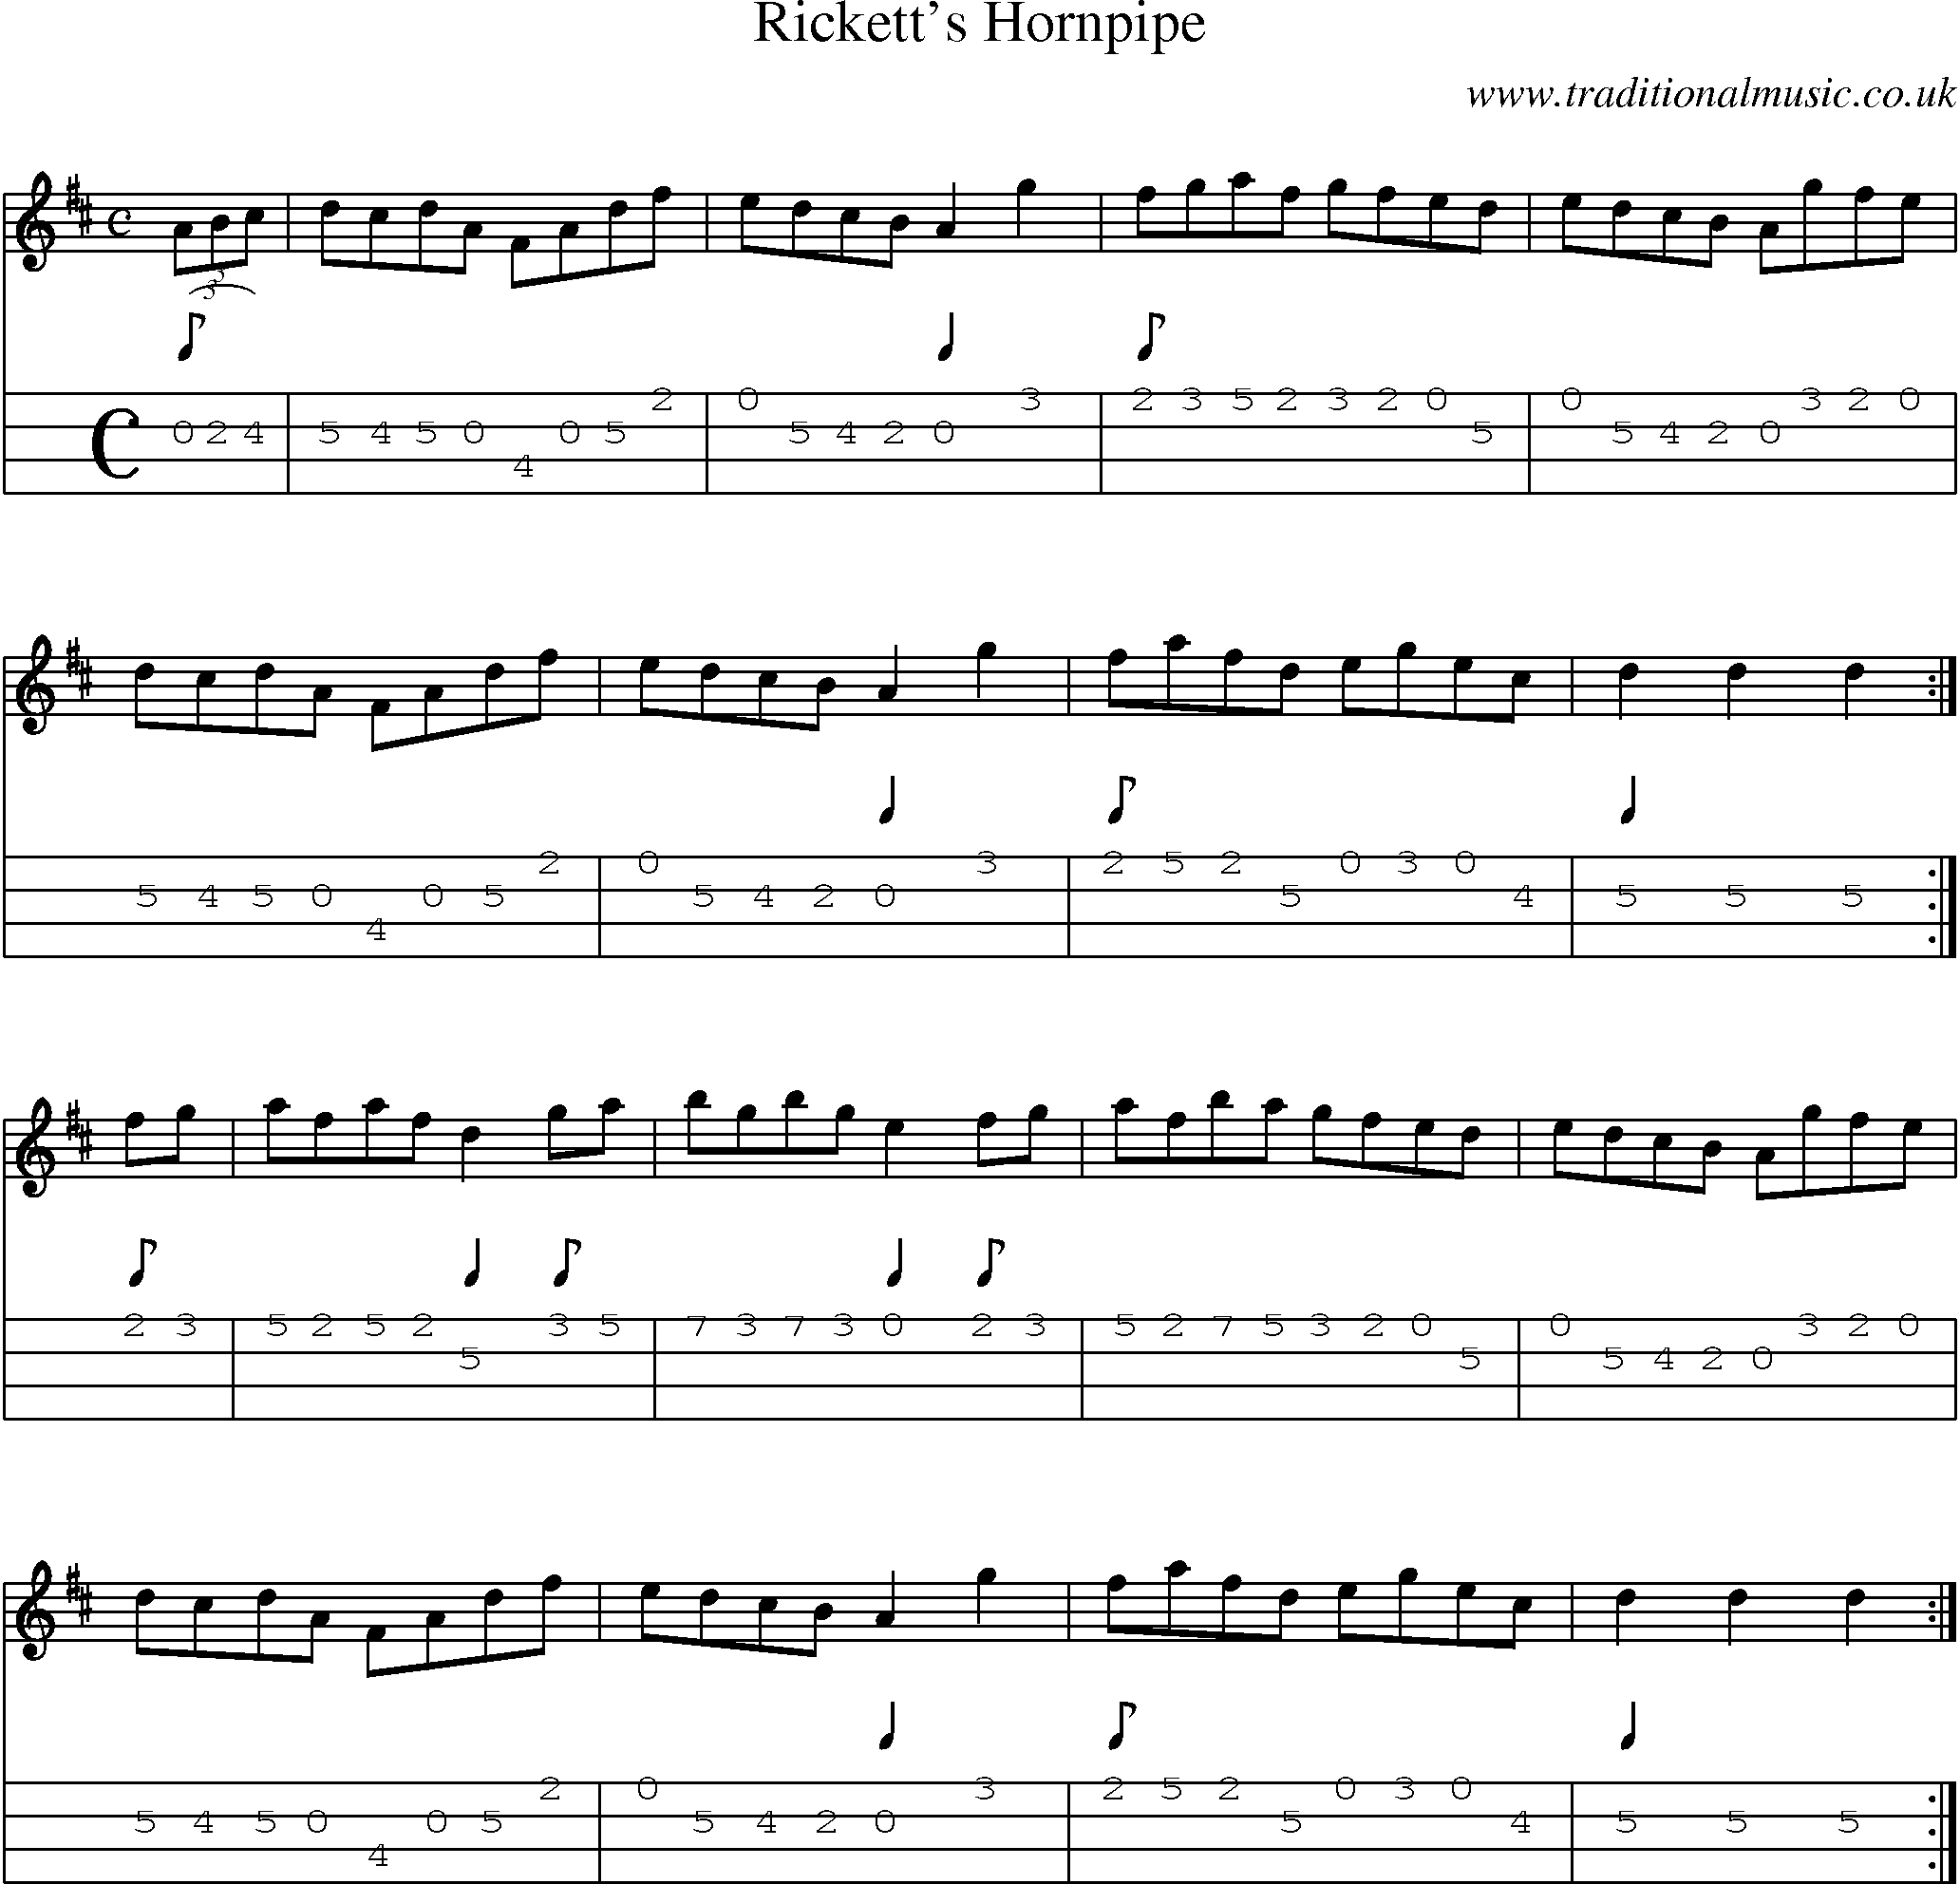 Music Score and Mandolin Tabs for Ricketts Hornpipe